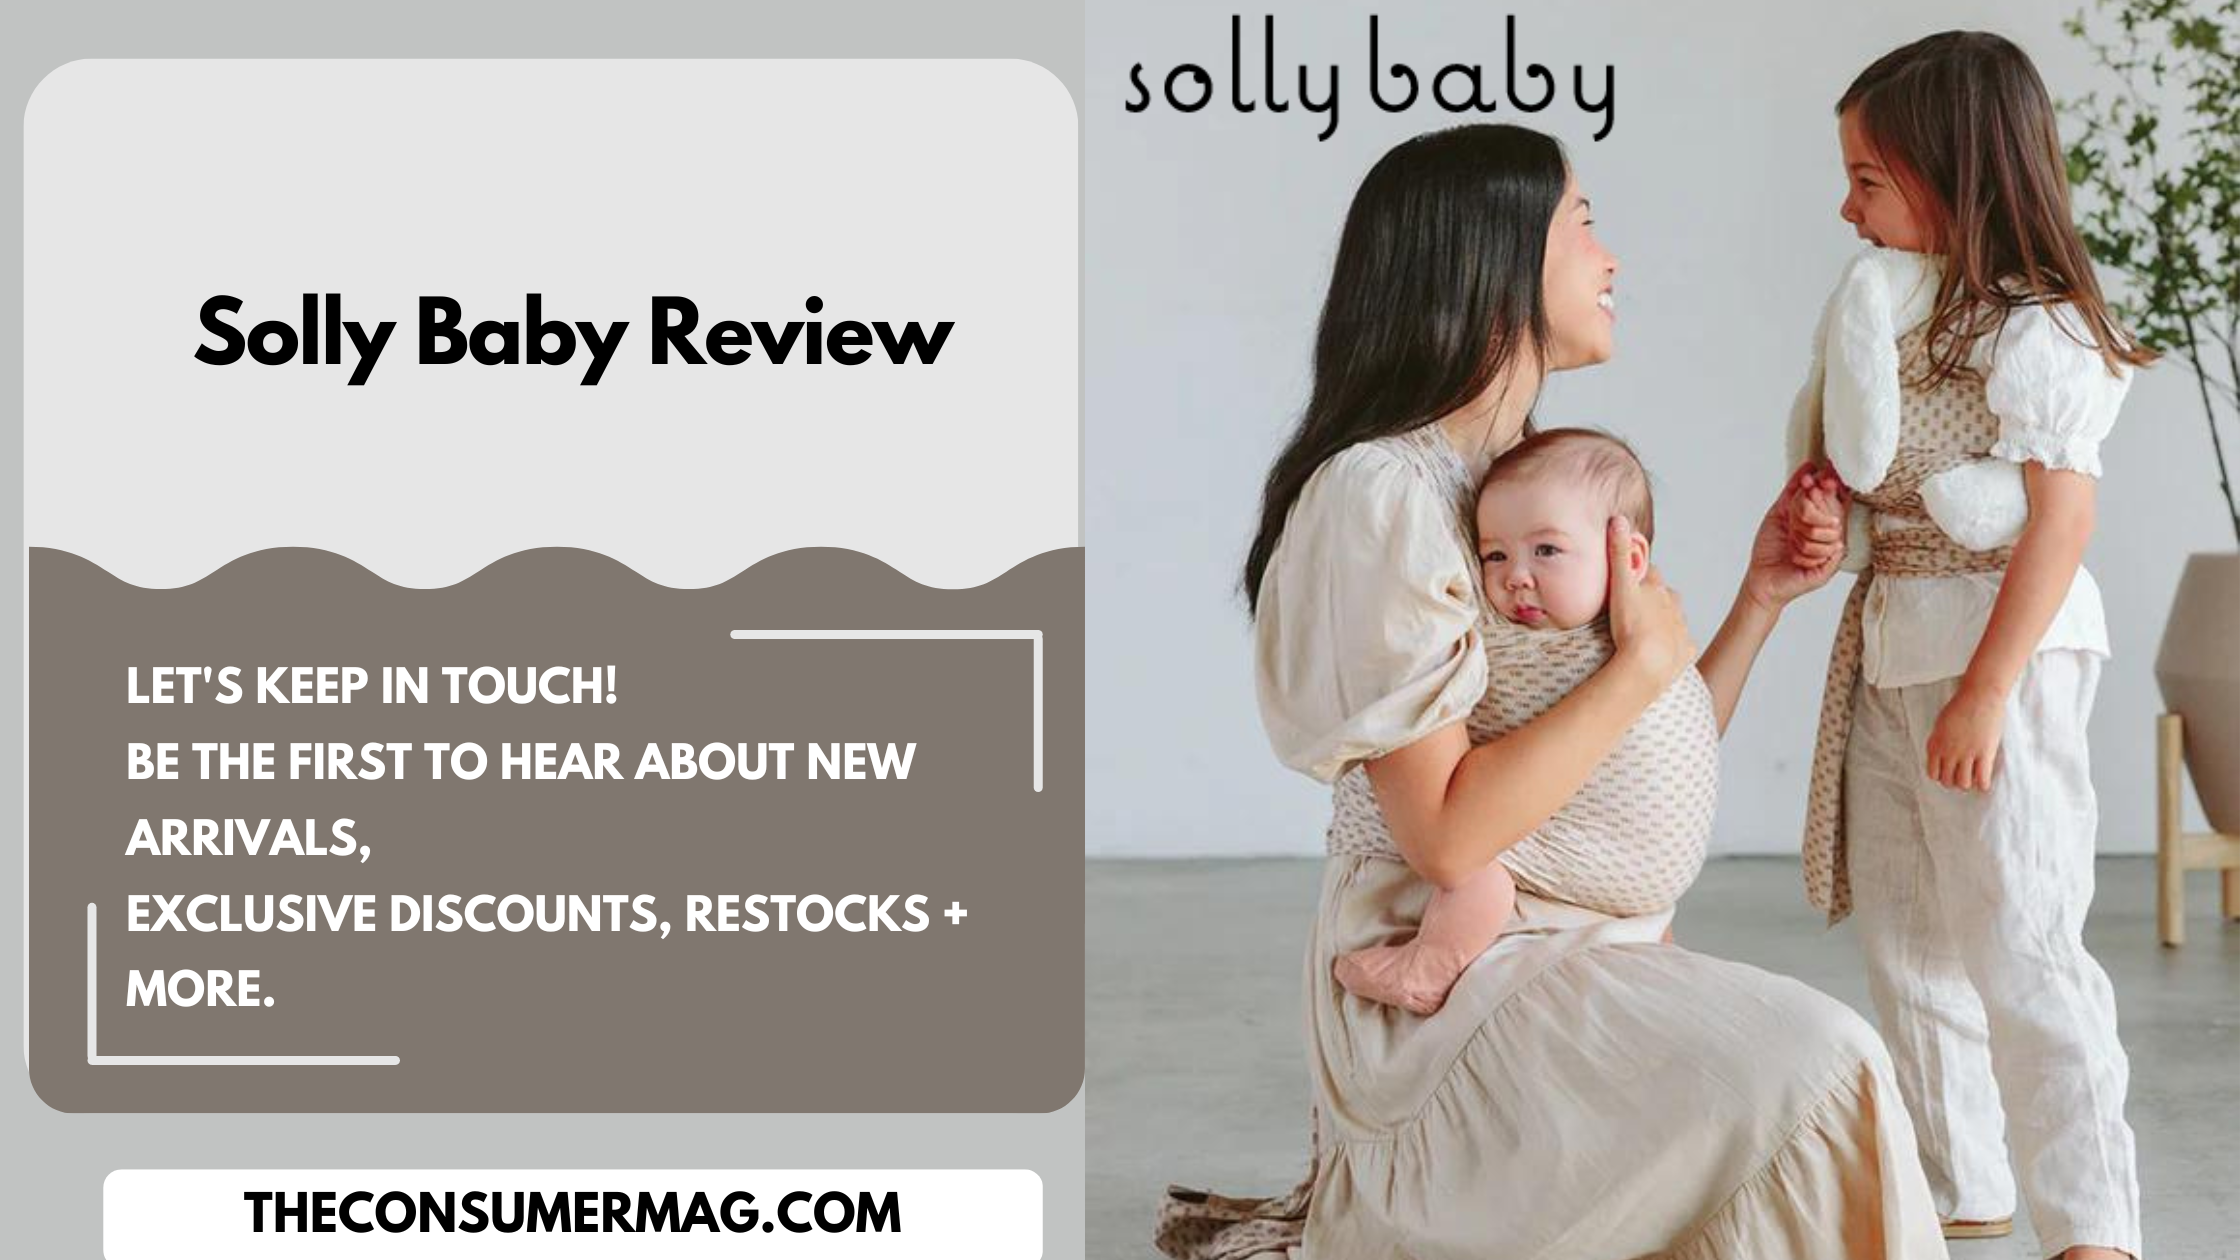 Solly Baby Featured Image